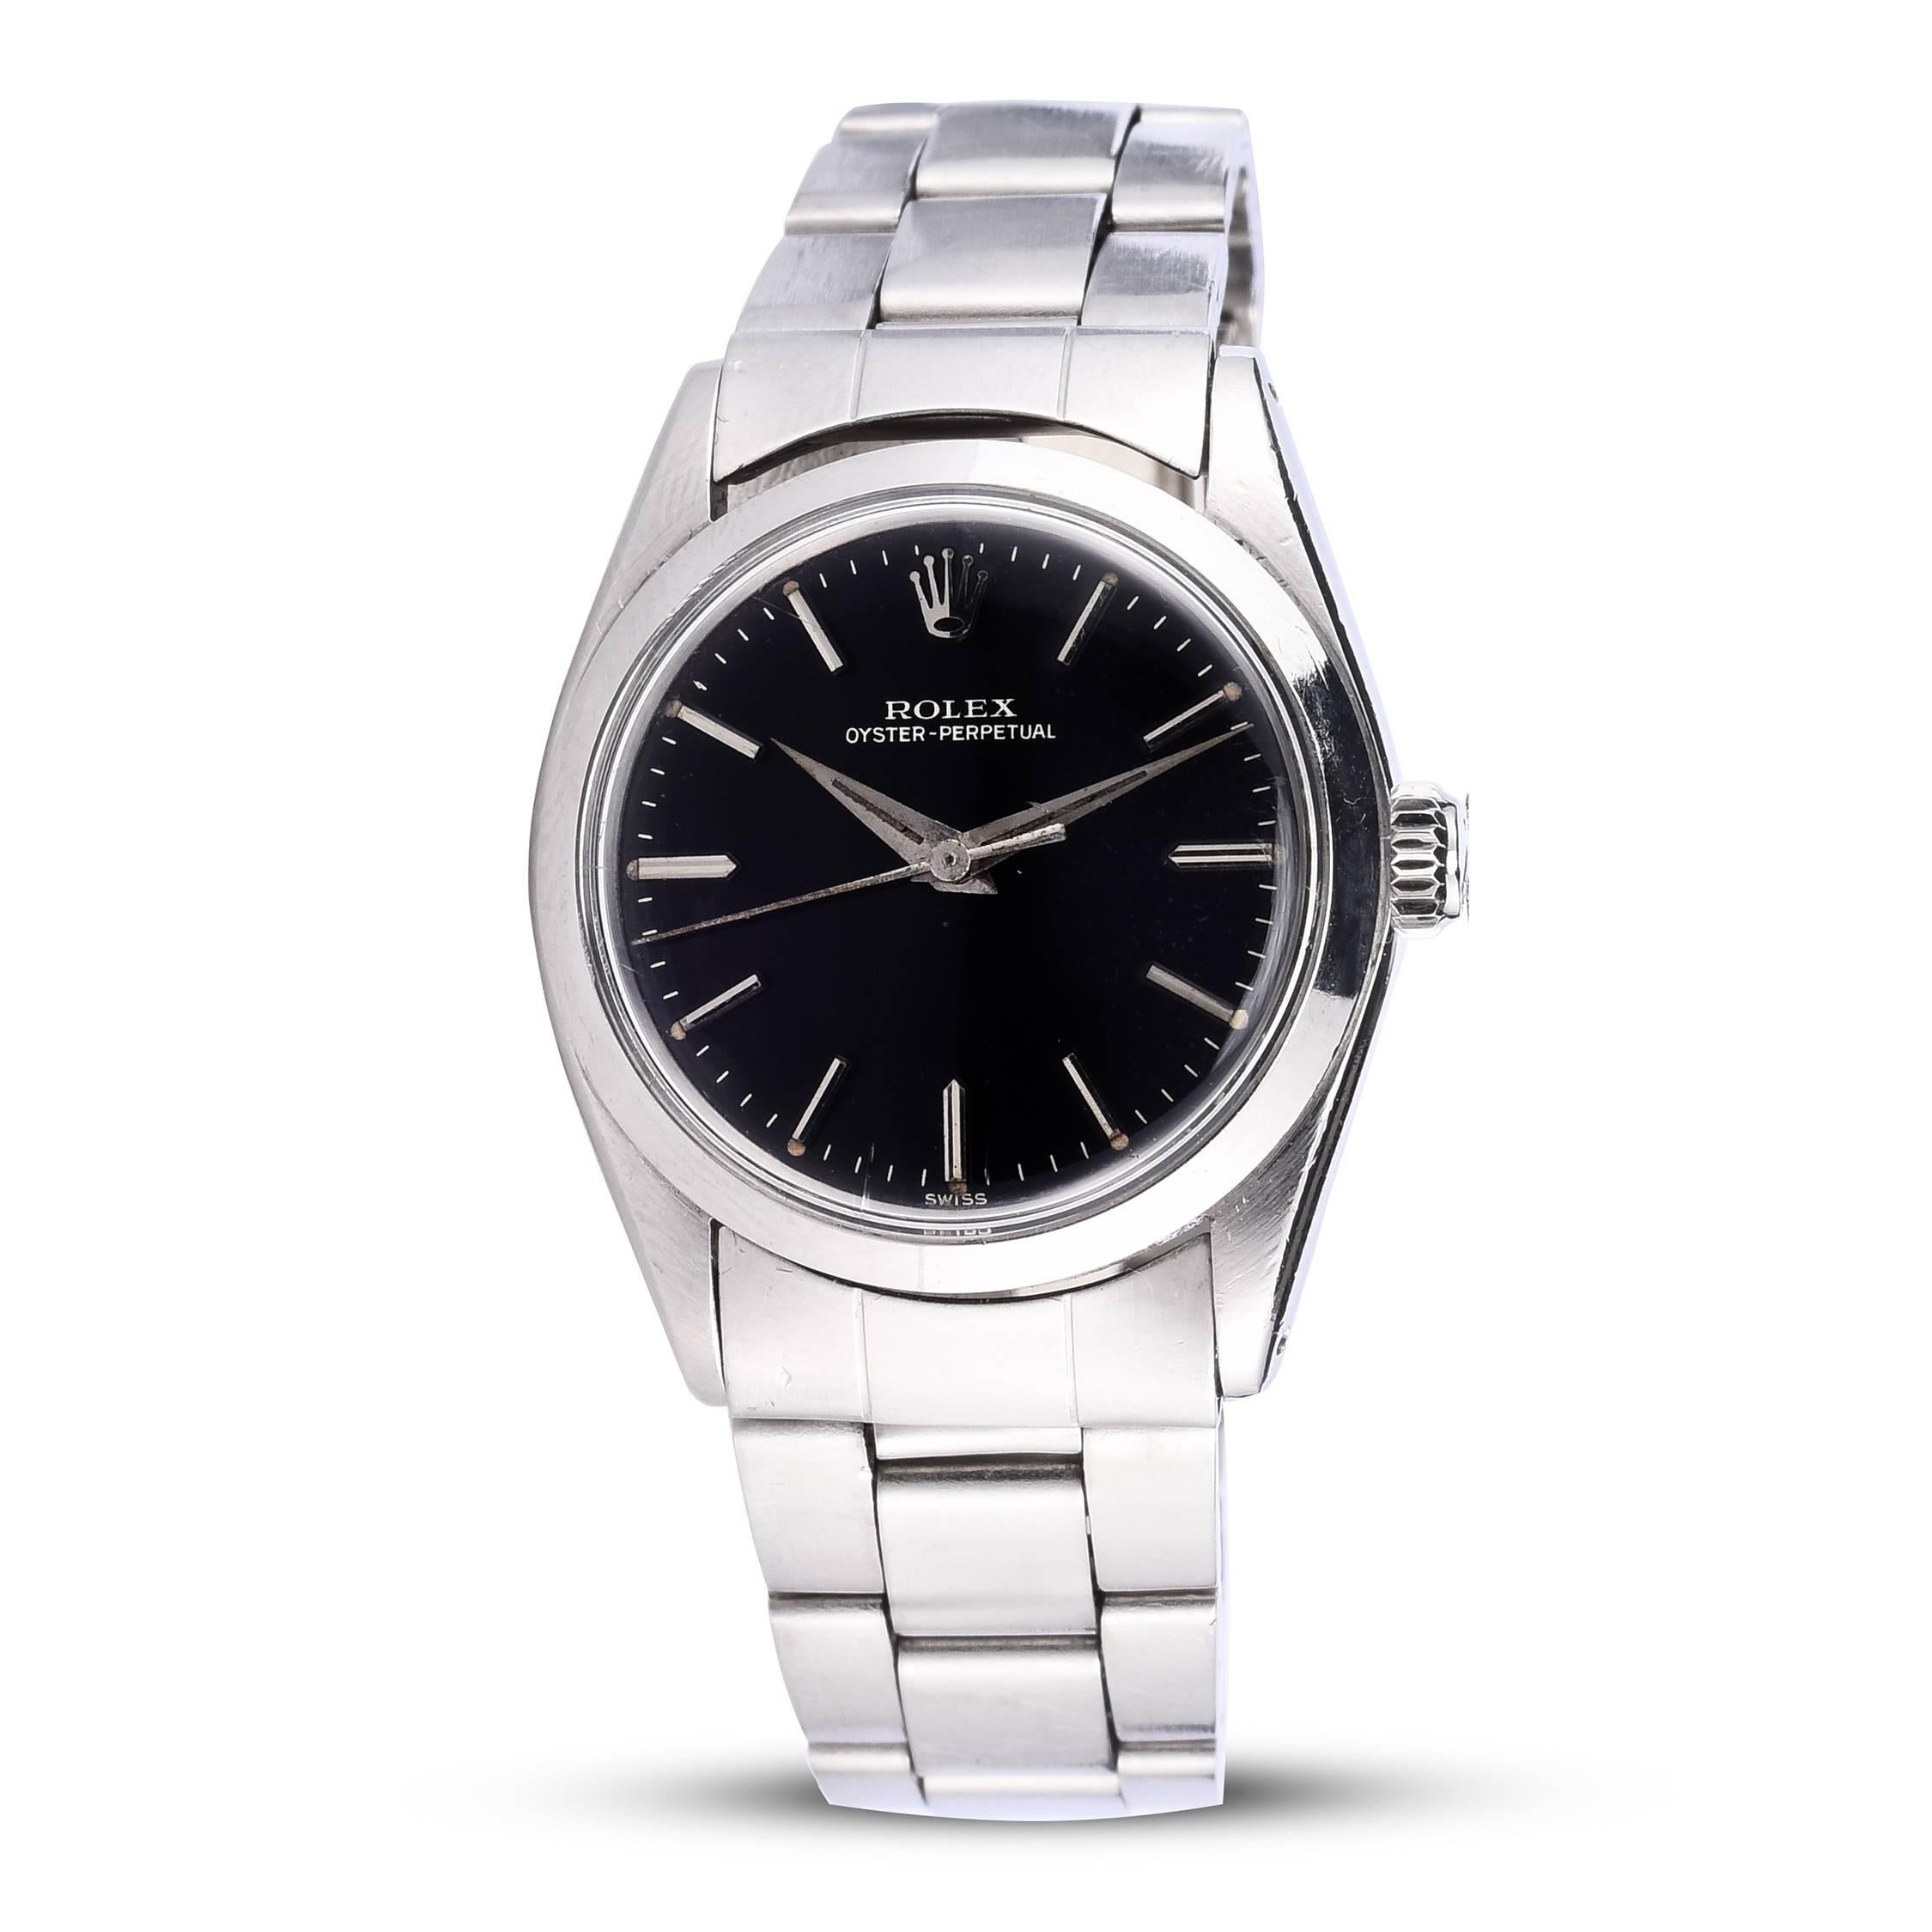 Rolex Stainless Steel Oyster Perpetual Watch
Rare 31mm Midsize Model 
Beautiful Black Swiss Gloss Dial with Gilt Writing 
Smooth Stainless Steel Bezel
Dauphine Hands
Features Original Rolex Automatic Movement 
Plastic Crystal
From Early 1960's
Comes